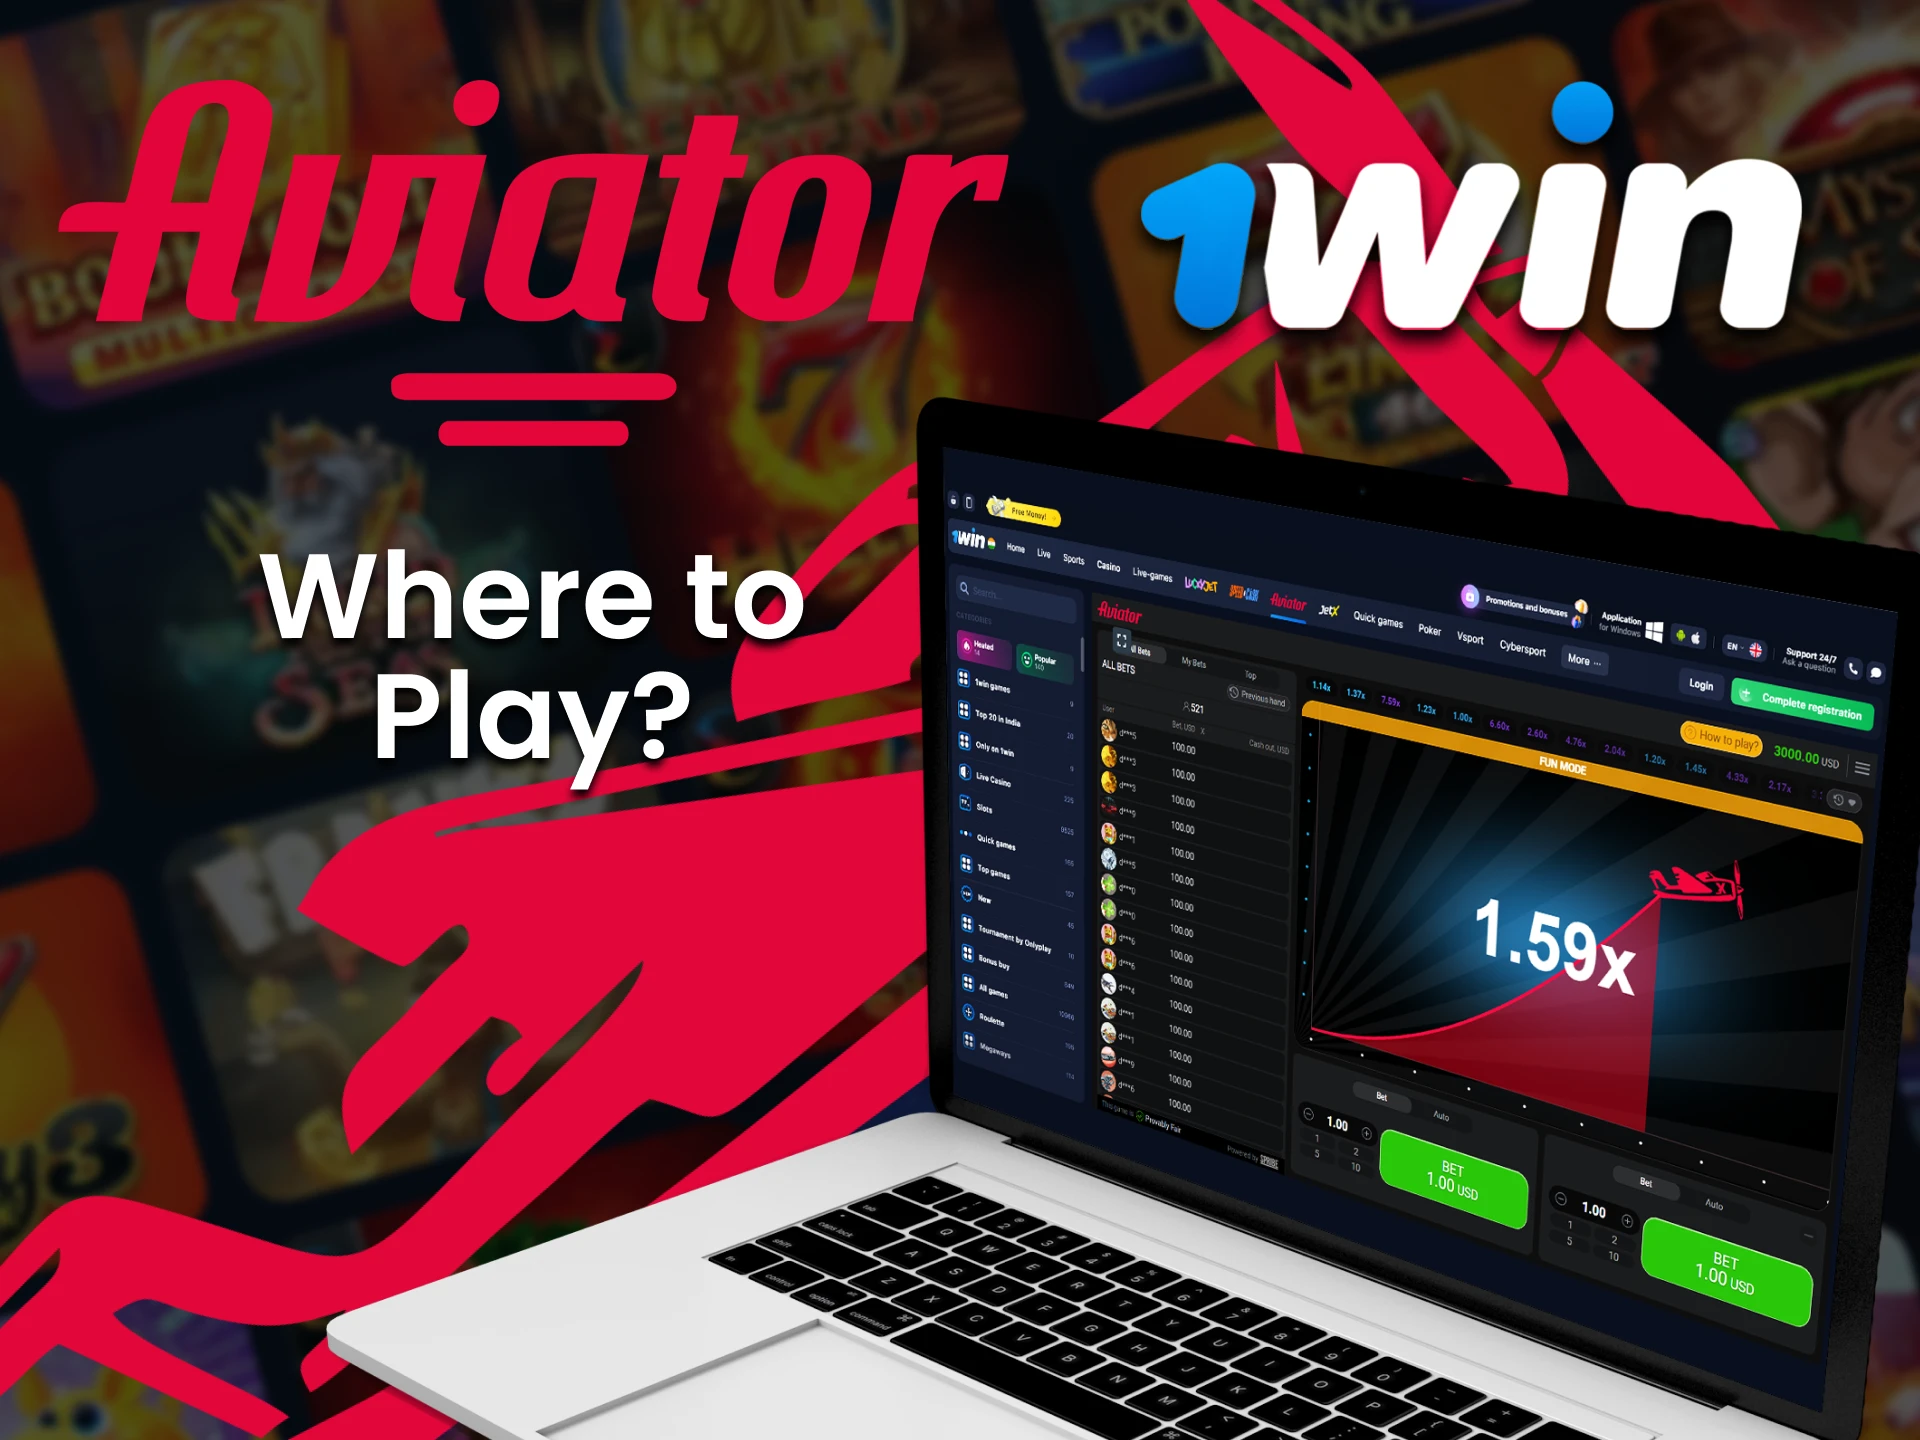 You can play Aviator on the 1Win website or in the app for Android and iOS.